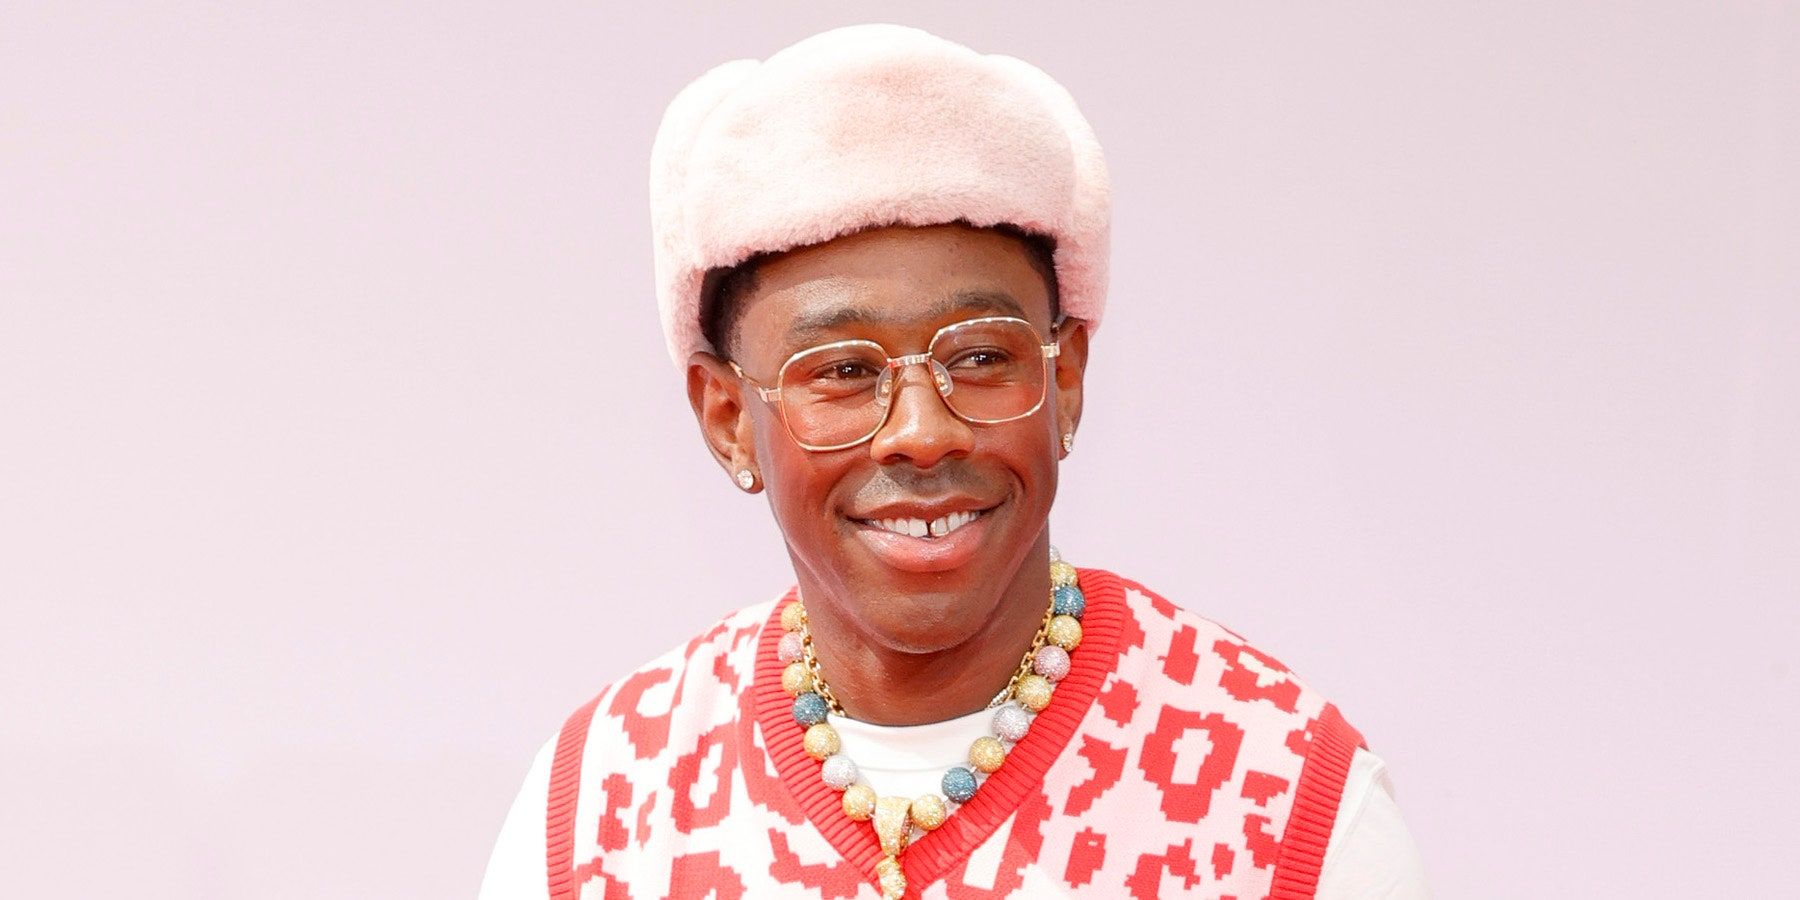 Image of Tyler the Creator against a pink background.